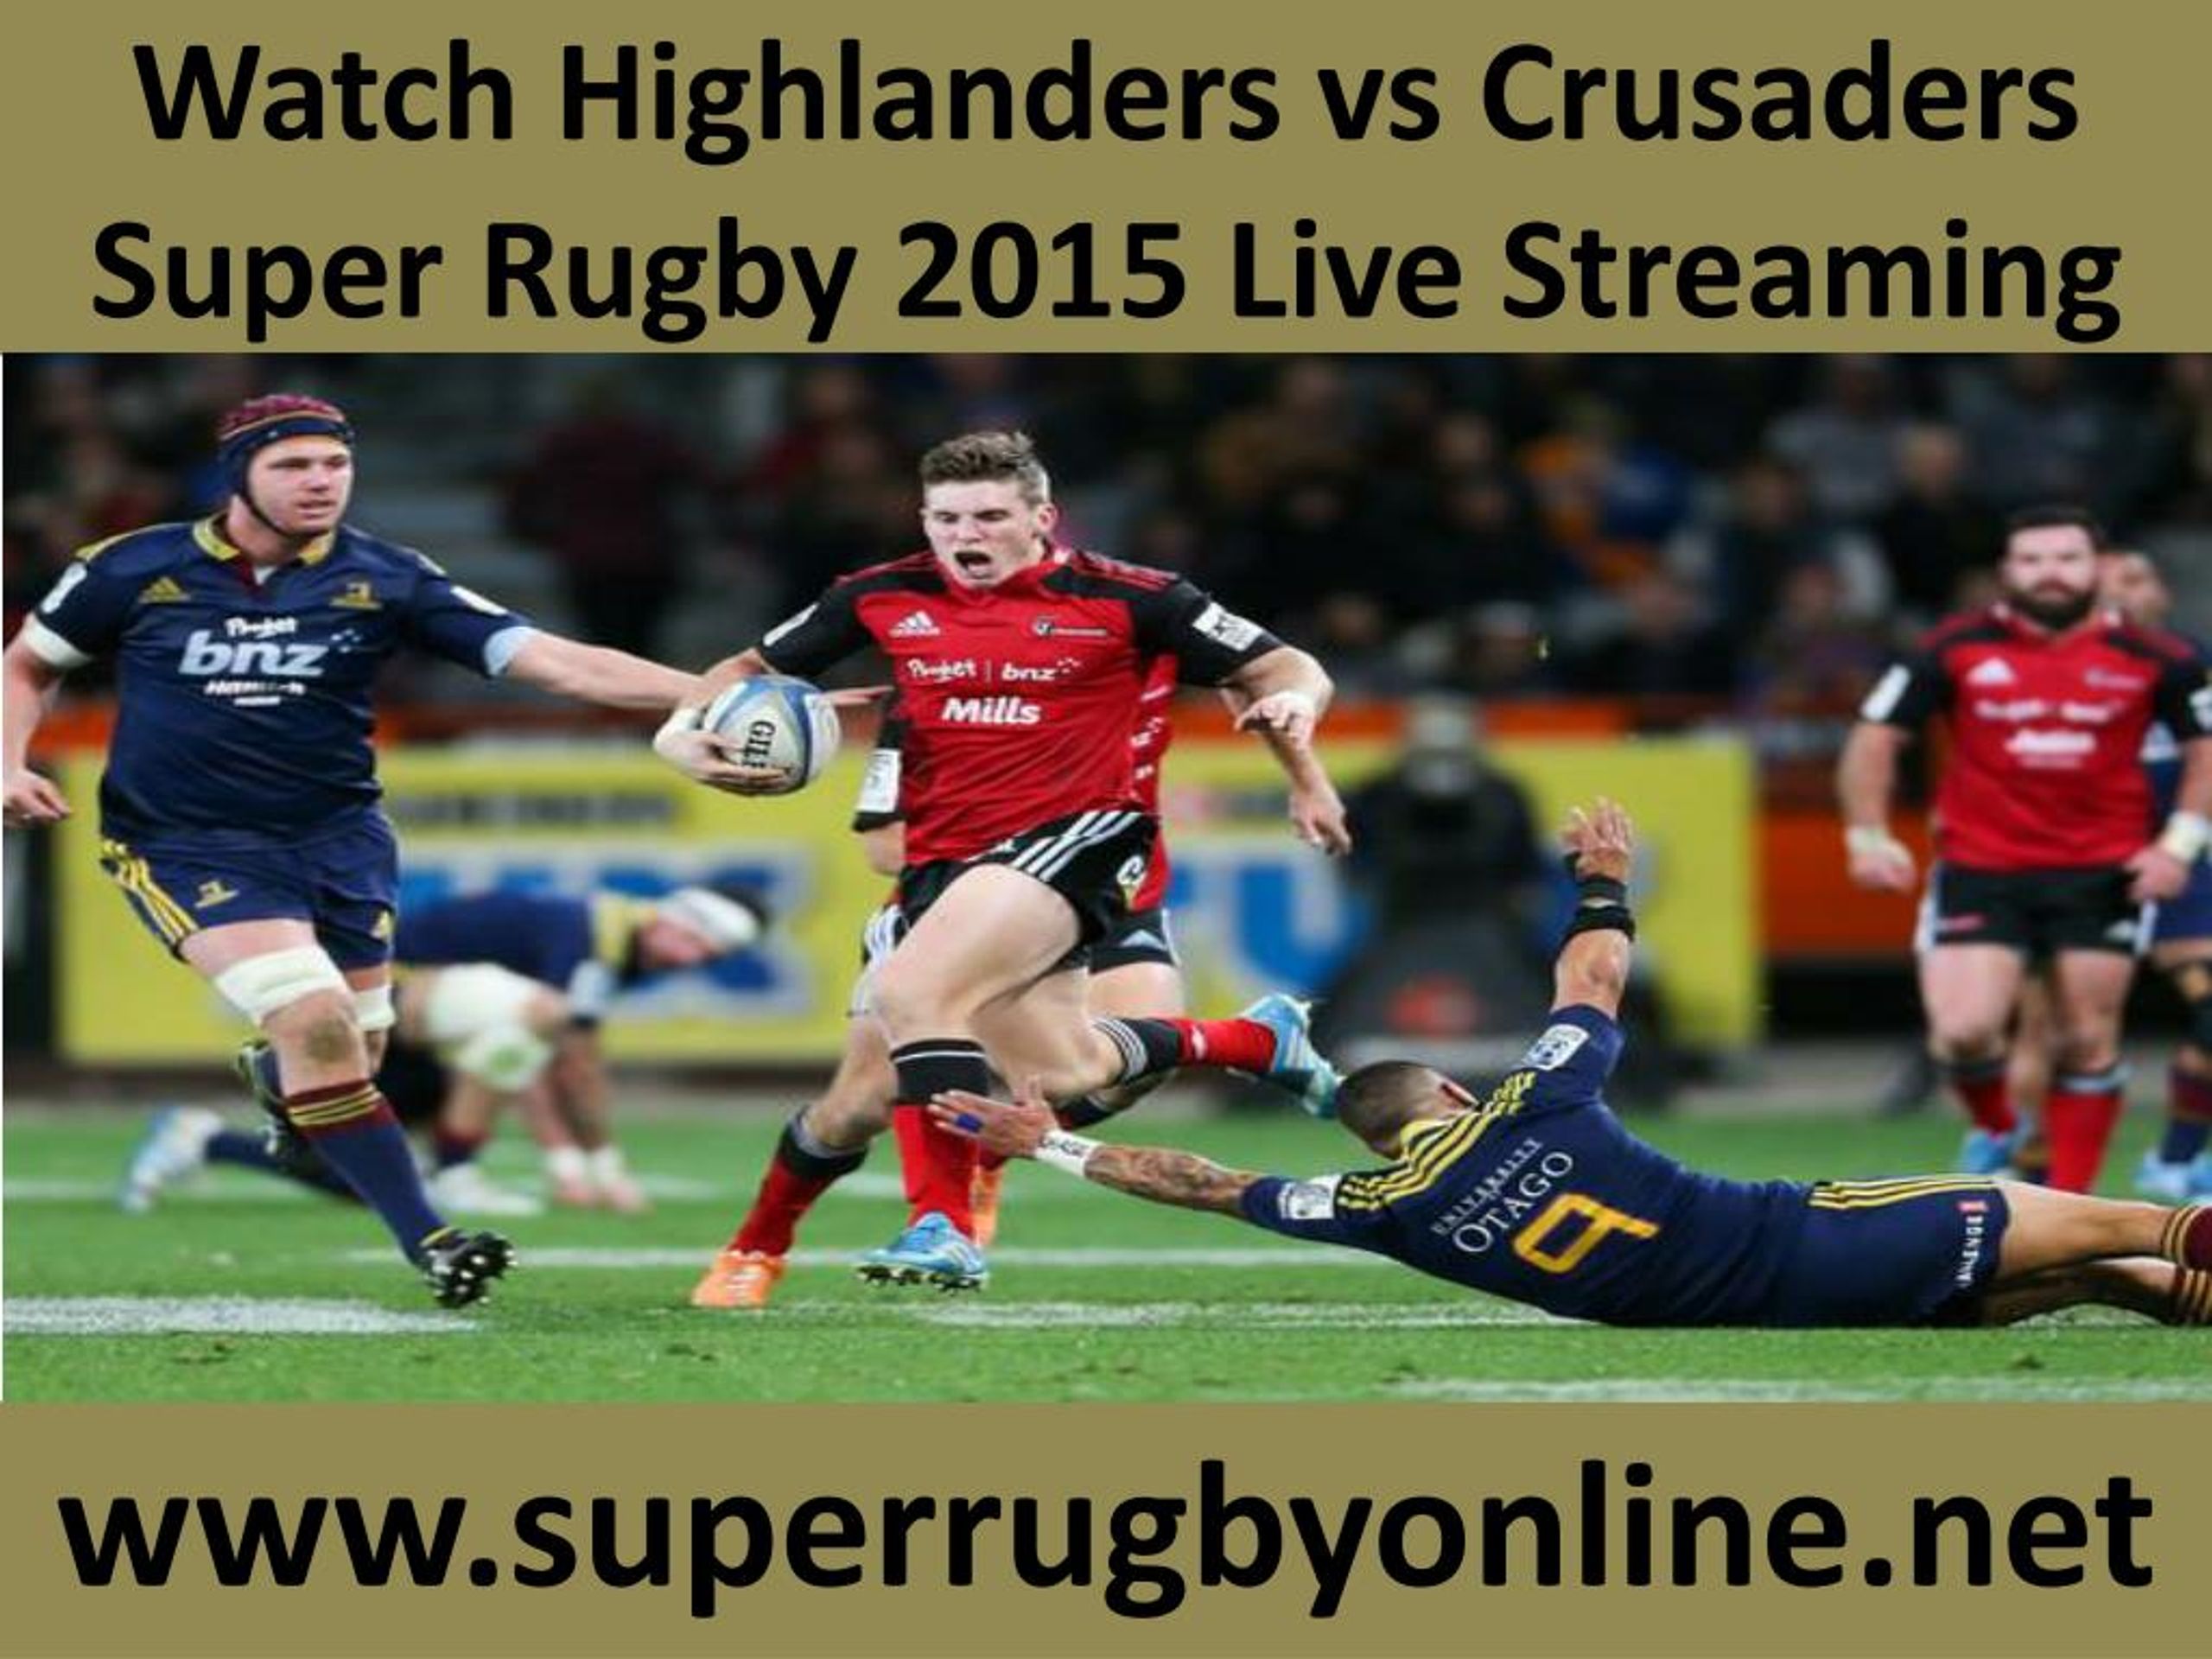 PPT - White vs Aussie Rugby 21 Feb 2015 streaming PowerPoint Presentation